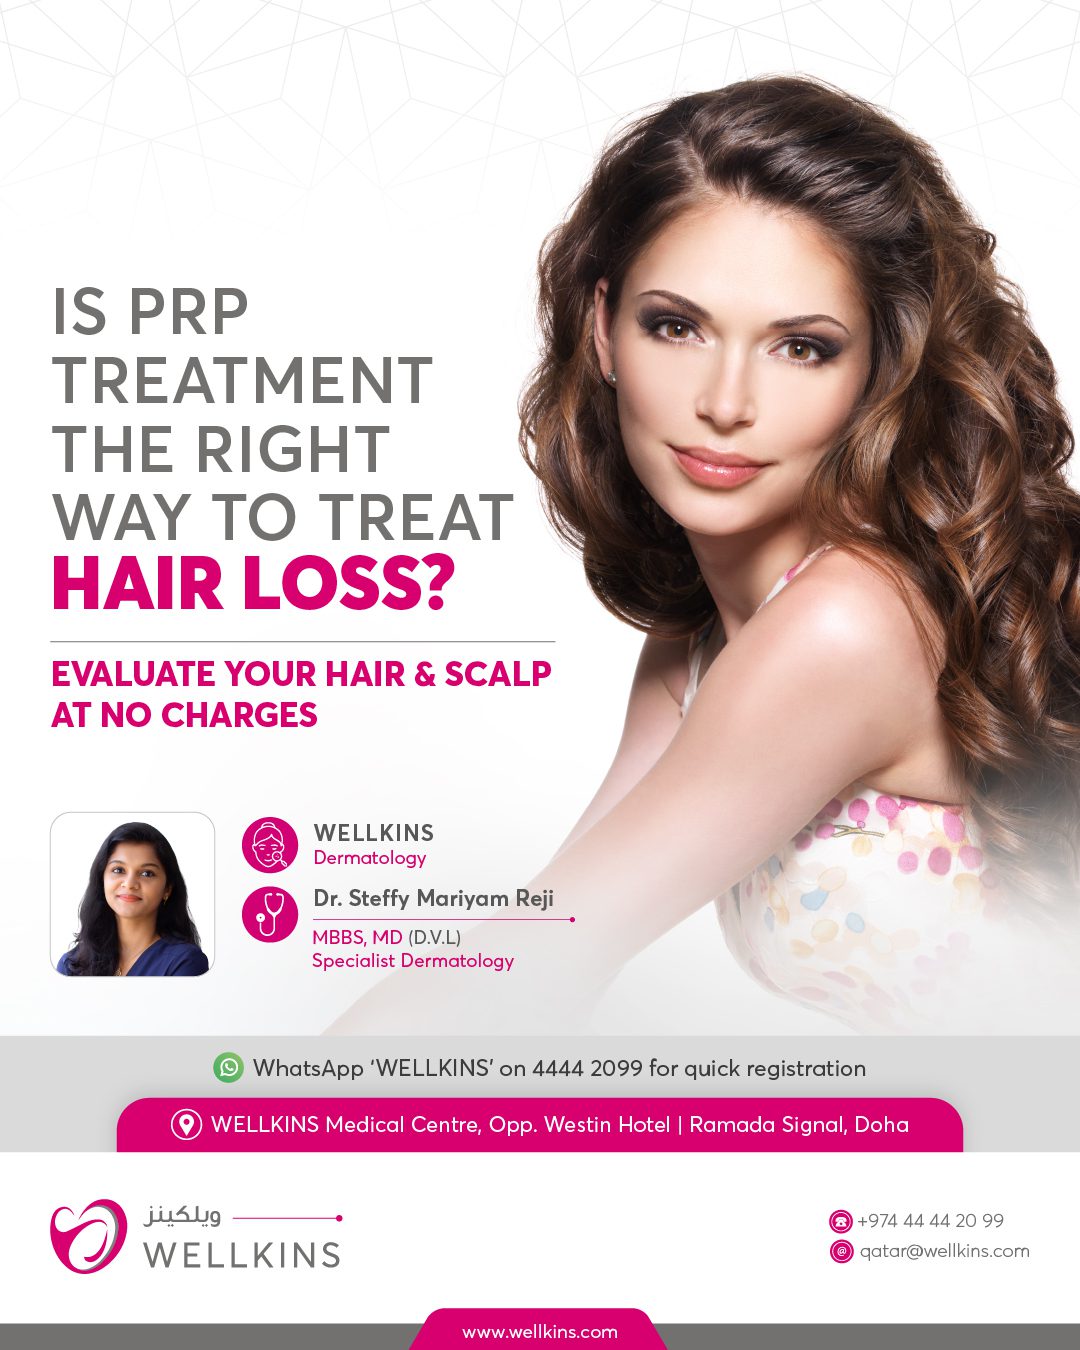 PRP Hair therapy is not a one-size-fits-all solution. It's important to understand if it's the right option for you before proceeding with treatment. Our team of experts is here to provide you with all the information and guidance you need to make an informed decision about whether PRP Hair therapy is the right choice for you.To help you make this decision, we are offering a complimentary consultation with our specialist Dr. Steffy Mariyam. During this consultation, Dr.Steffy Mariyam will evaluate your hair and scalp, discuss your hair restoration goals, and determine if PRP Hair therapy is the best option for you.Don't wait any longer to take control of your hair loss, book your complimentary consultation with Dr. Steffy Mariyam today! Book now: https://wellkins.com/prp-for-hairloss/_______________________________
To learn more about #WELLKINSQATAR and our services, kindly visit our website www.wellkins.com
Helpline: 4444 2099
_______________________________
#Wellkinsqatar #wellkins #medicalcentre #Qatar2022